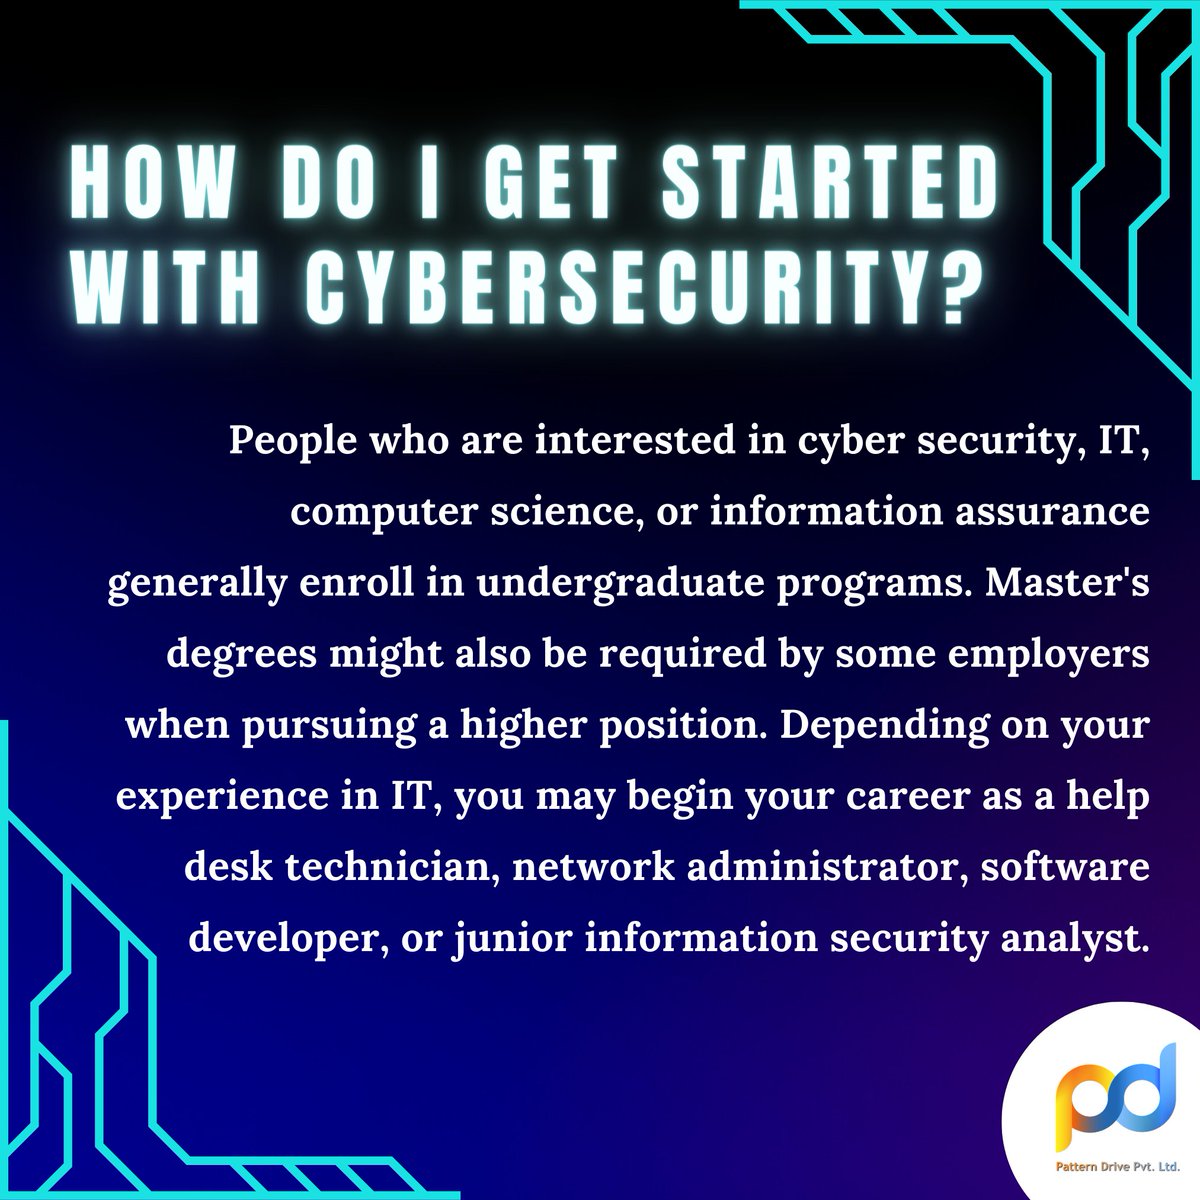 Getting into #cybersecurity is quite overwhelming. But how should you get started? what are the requirements, qualifications etc?

Check out: cutt.ly/g3wUbAX

#CyberSecurityCourses #cybertraining #cybersecuritytraining #cybersecurityeducation #PatternDrivePrivateLimited